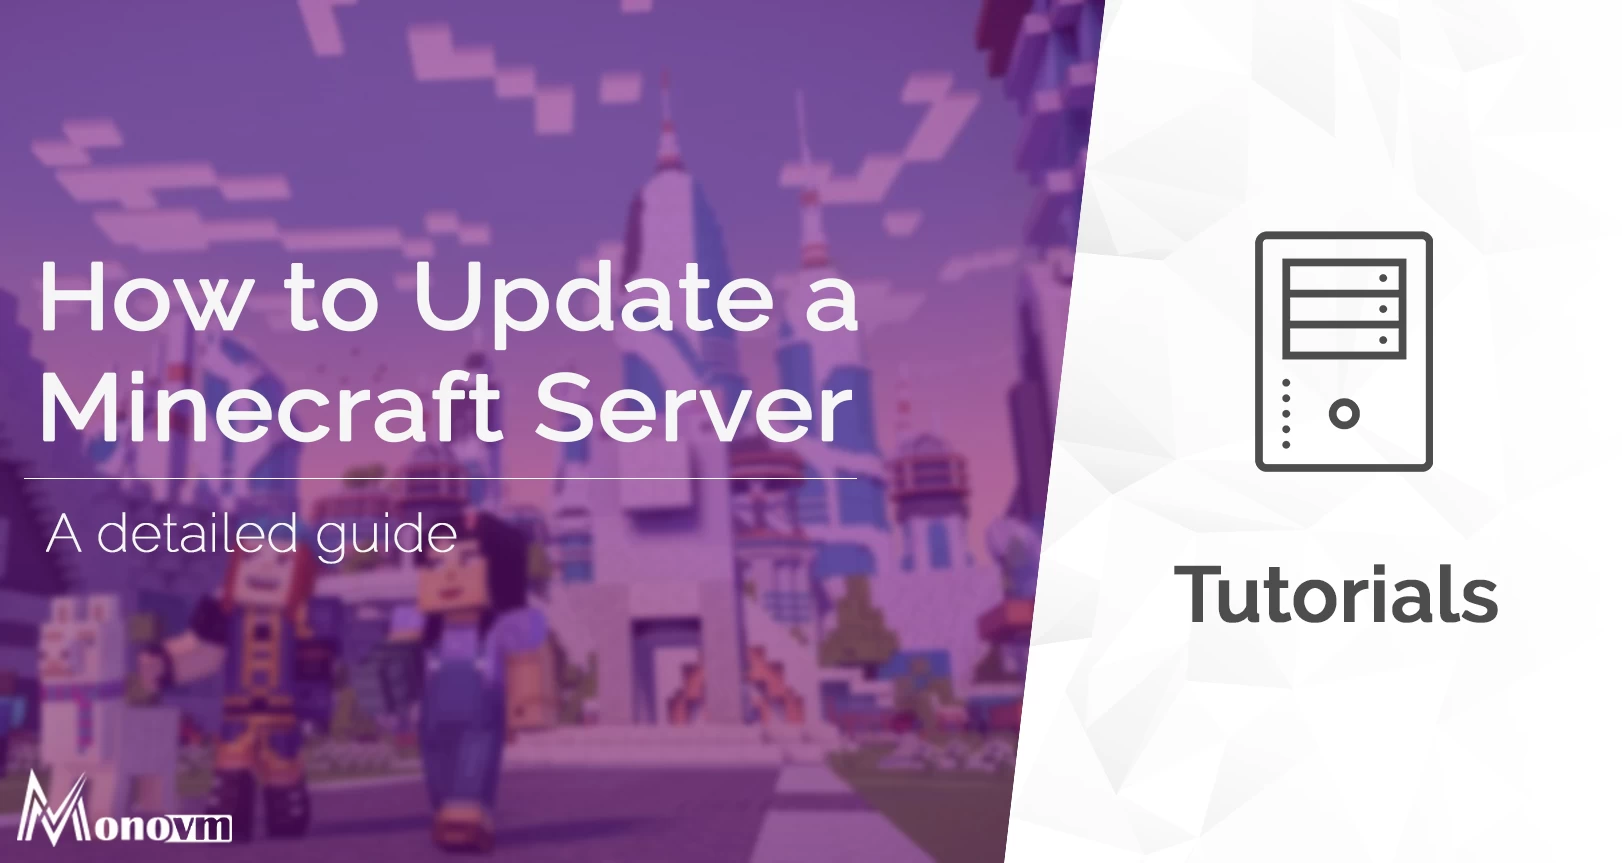 How to Update a Minecraft Server